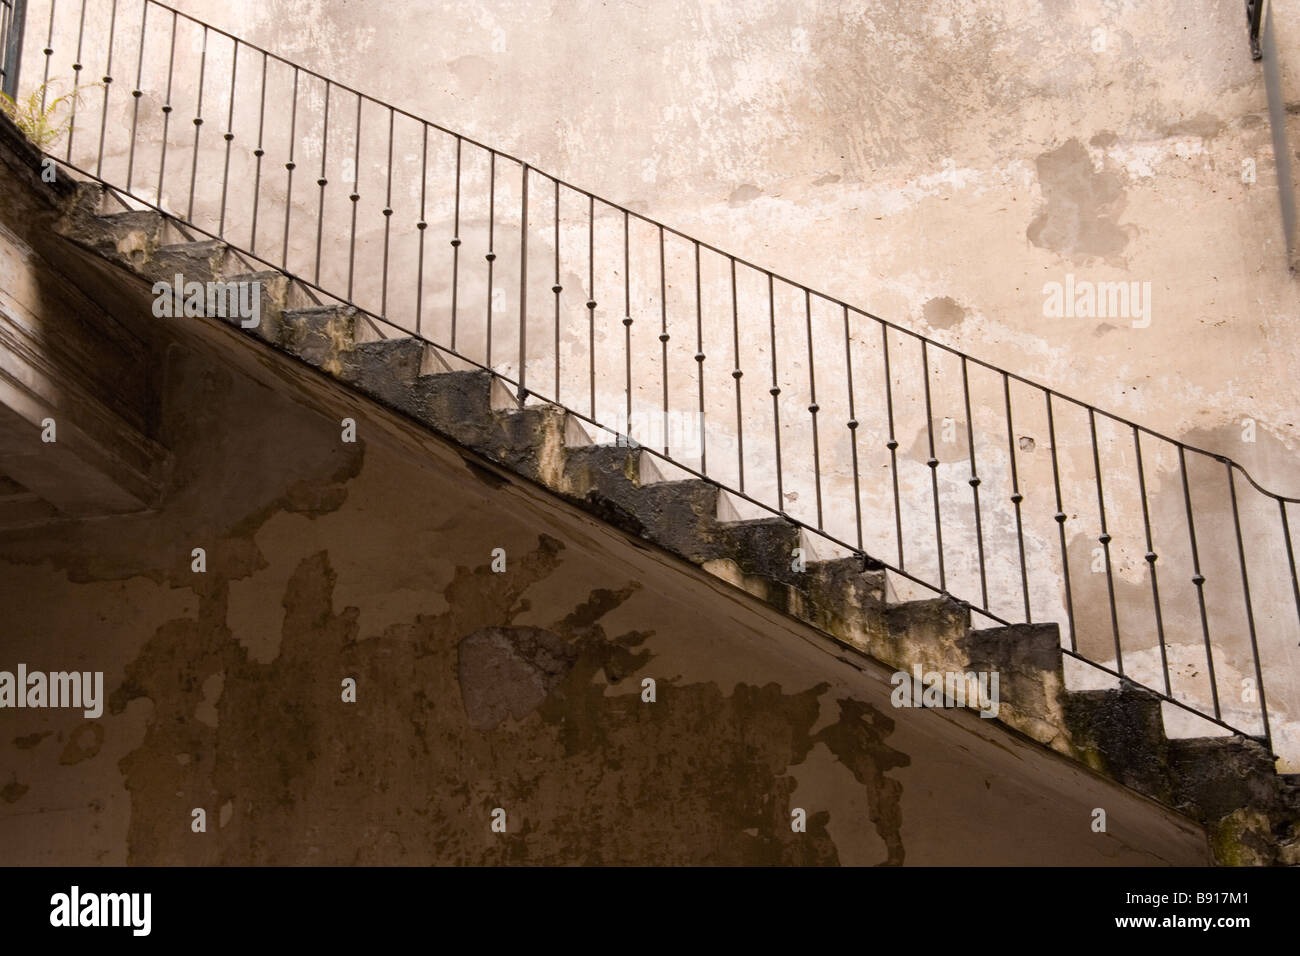 A flight of stairs, with a metal rail and peeling paint. Stock Photo